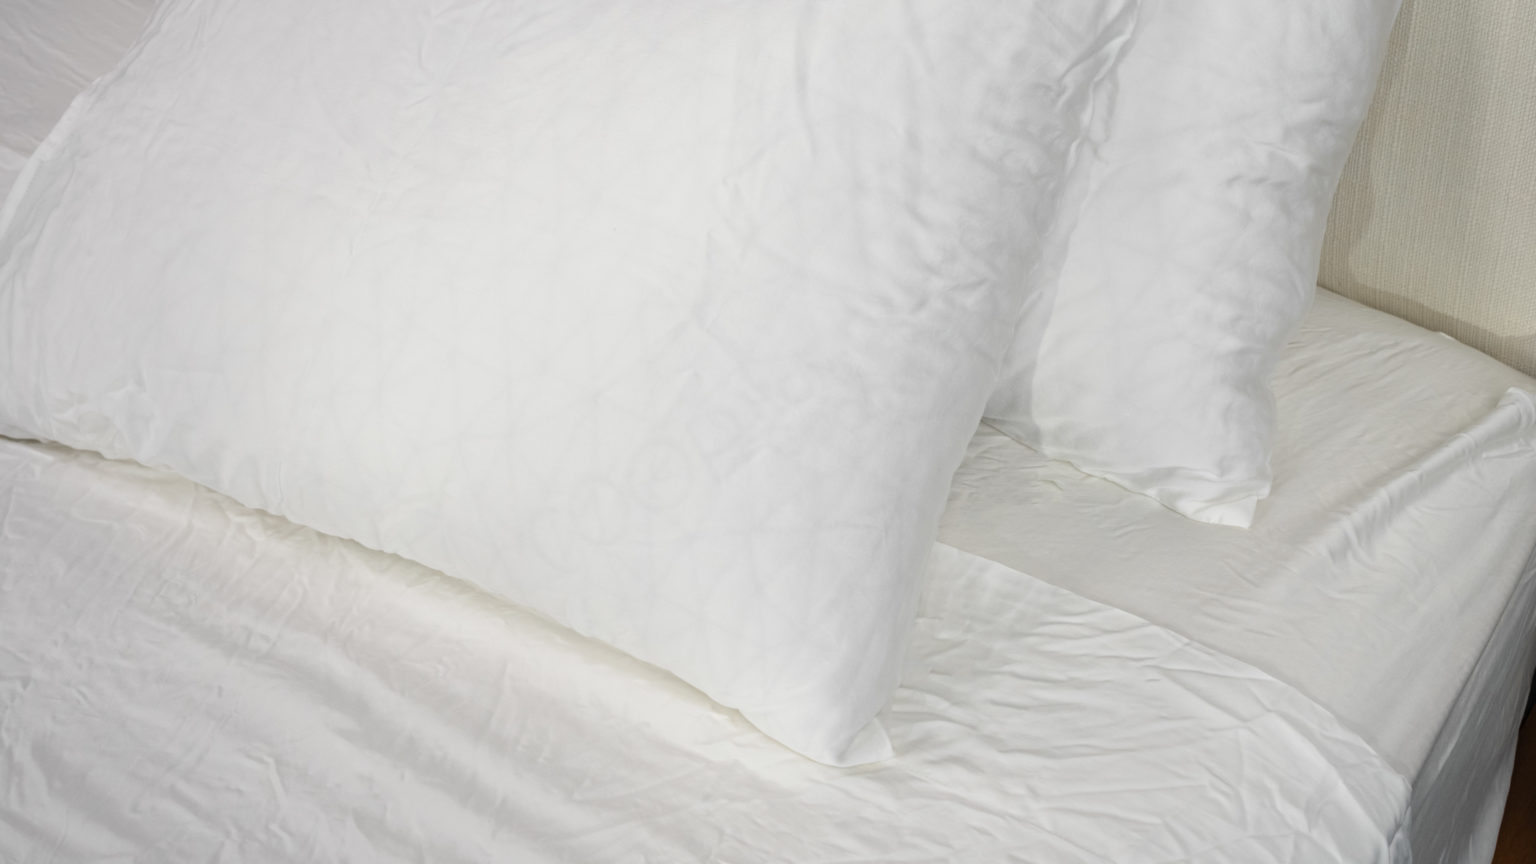 A picture of the Cozy Earth Bamboo Sheet Set in Sleep Foundation's test lab.